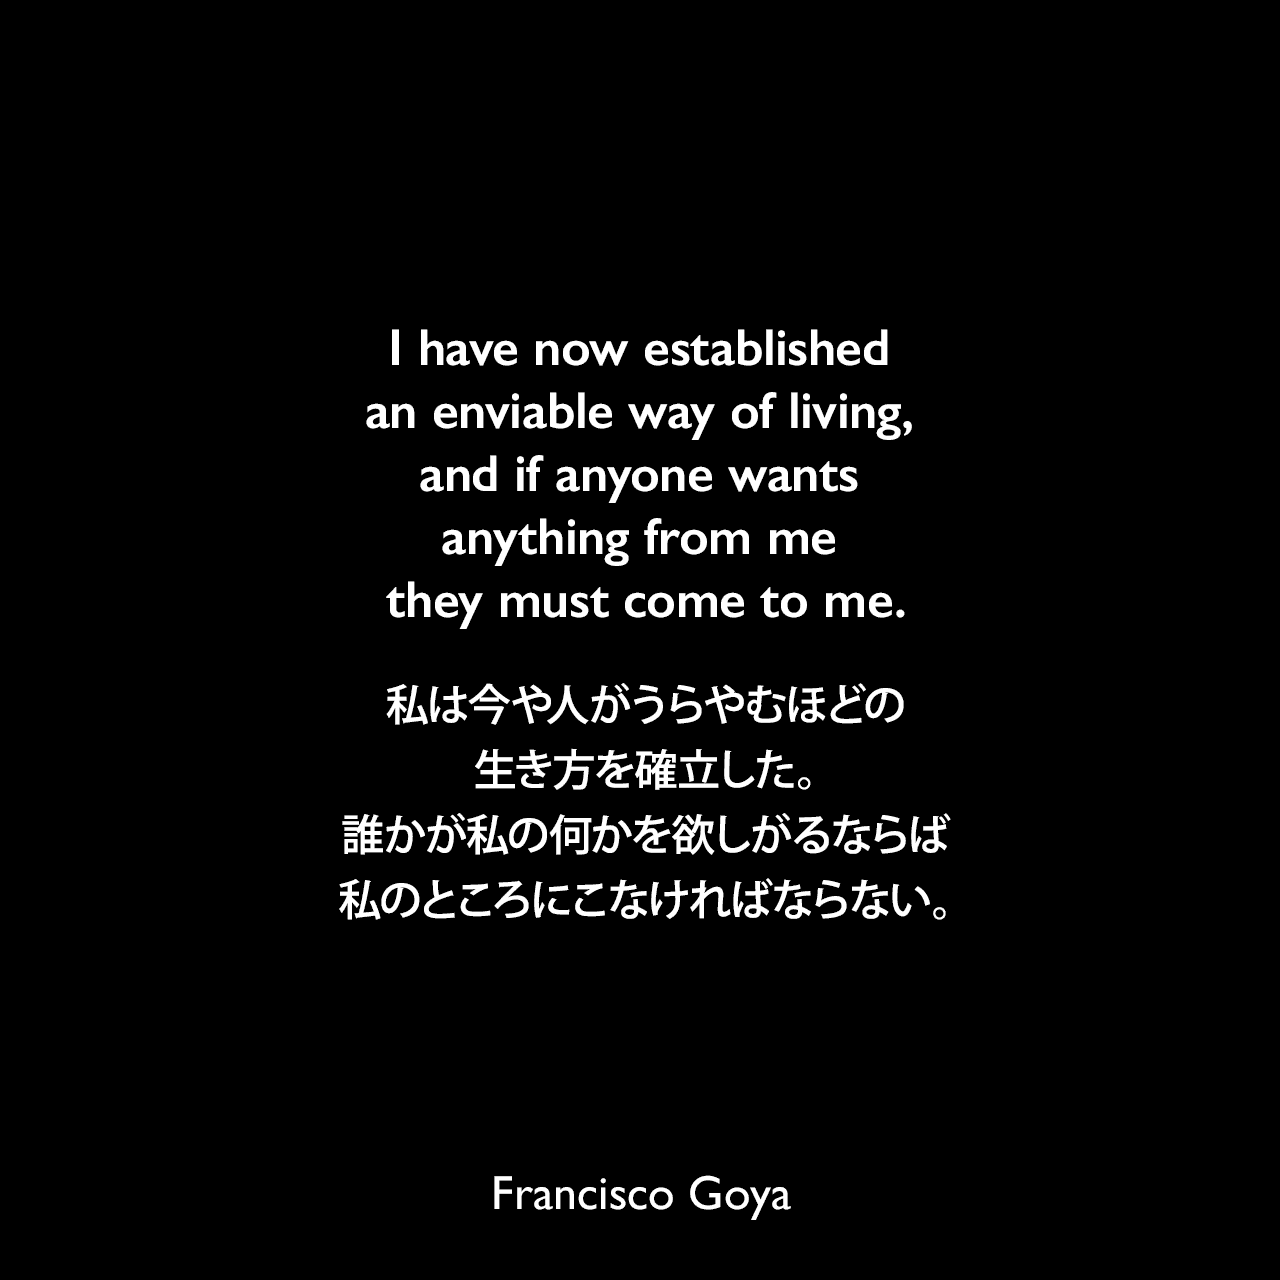 I have now established an enviable way of living, and if anyone wants anything from me they must come to me.私は今や人がうらやむほどの生き方を確立した。誰かが私の何かを欲しがるならば、私のところにこなければならない。- 1786年8月 ゴヤの親友「Don Martín Zapater」へ宛てた手紙よりFrancisco Goya